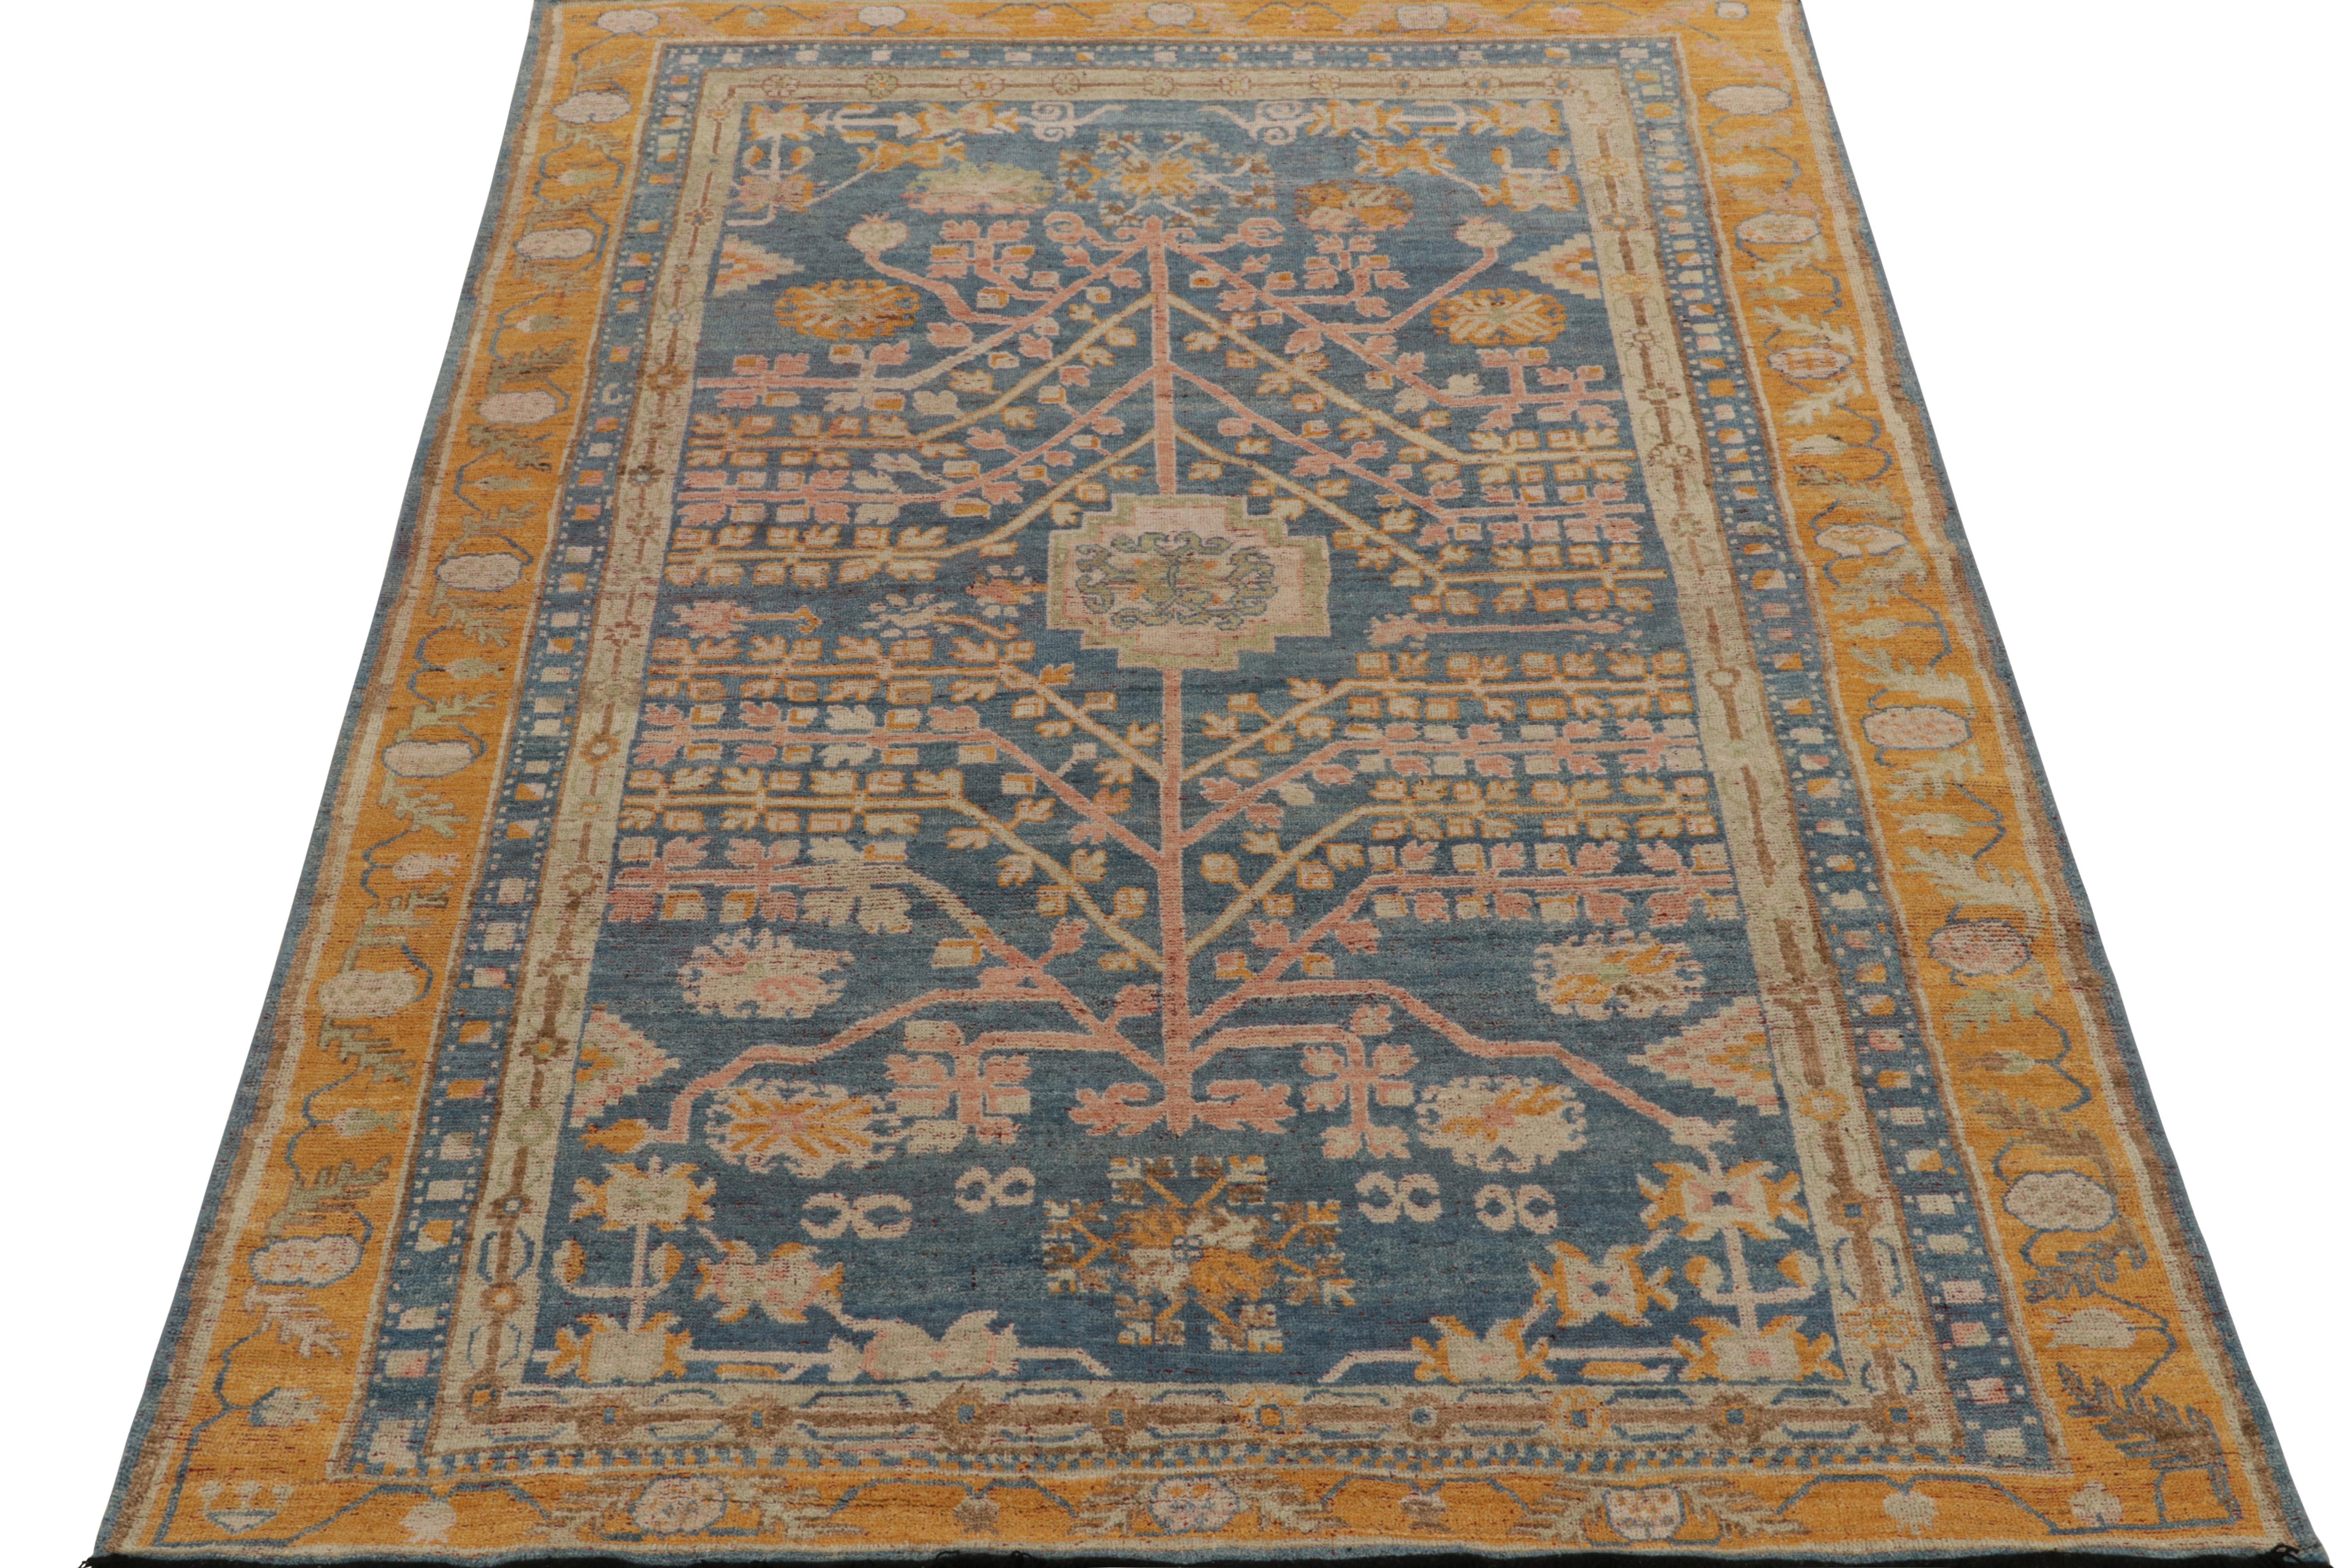 Indian Rug & Kilim’s Khotan Style Rug in Blue, Gold and Pink Geometric-Floral Patterns For Sale